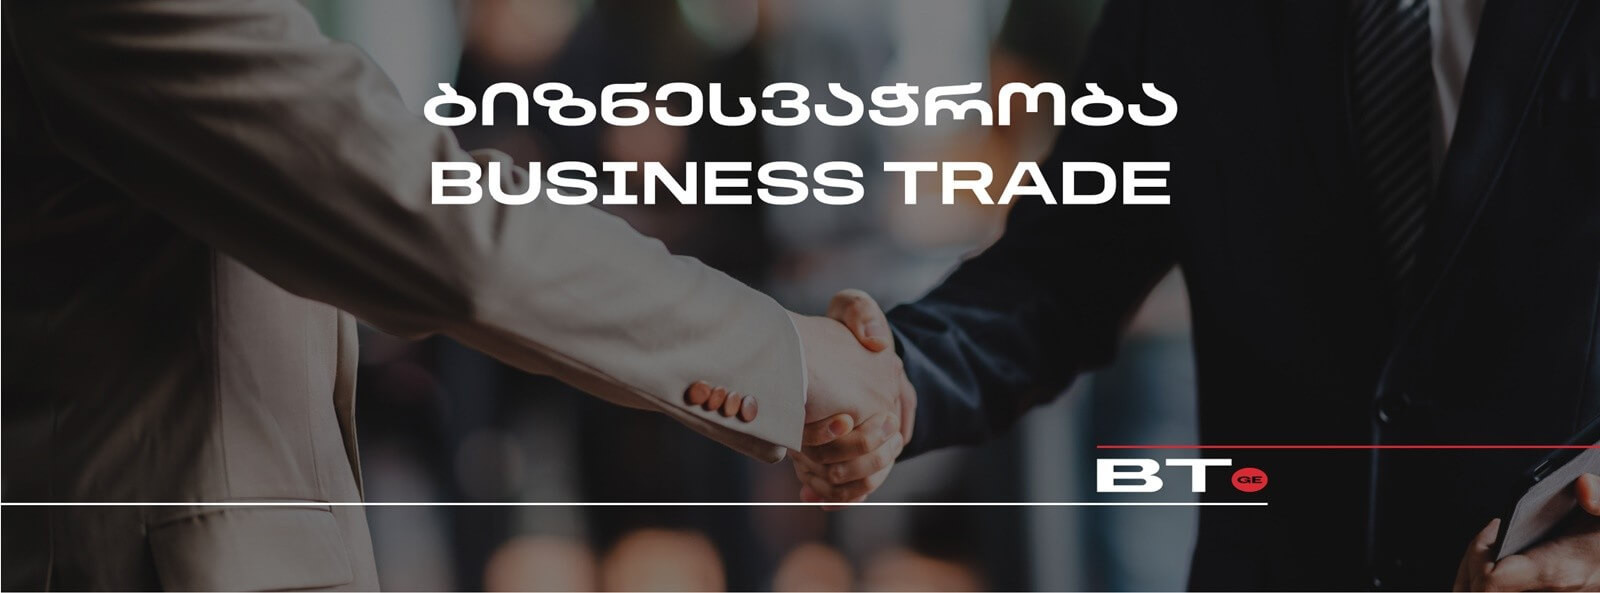 Business Trade - A New Project of GGM